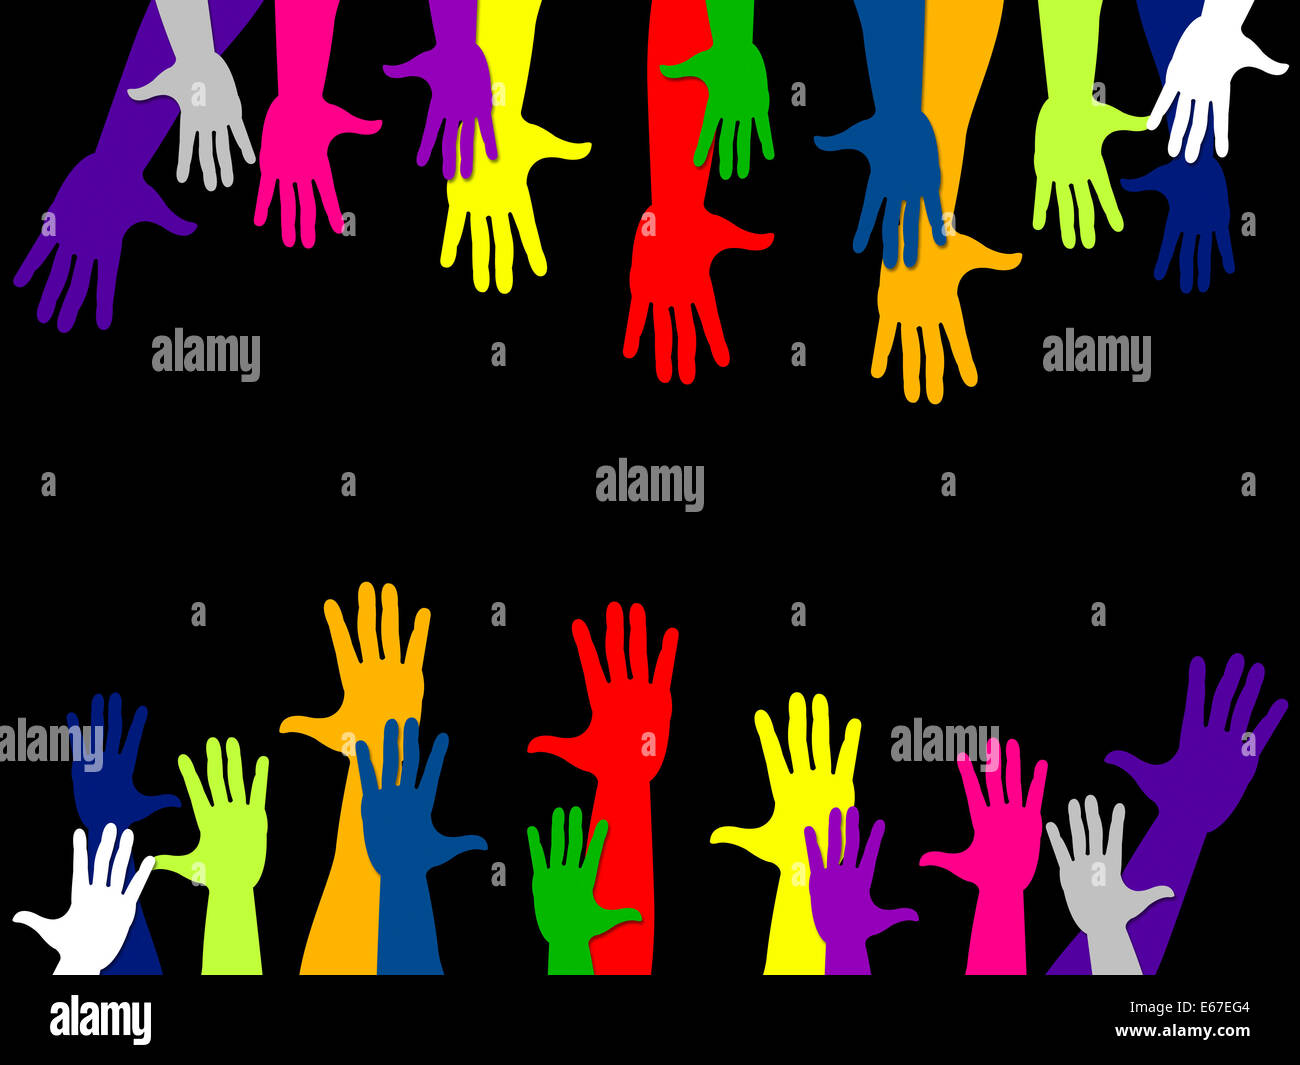 Reaching Out Indicating Hands Together And Friendship Stock Photo